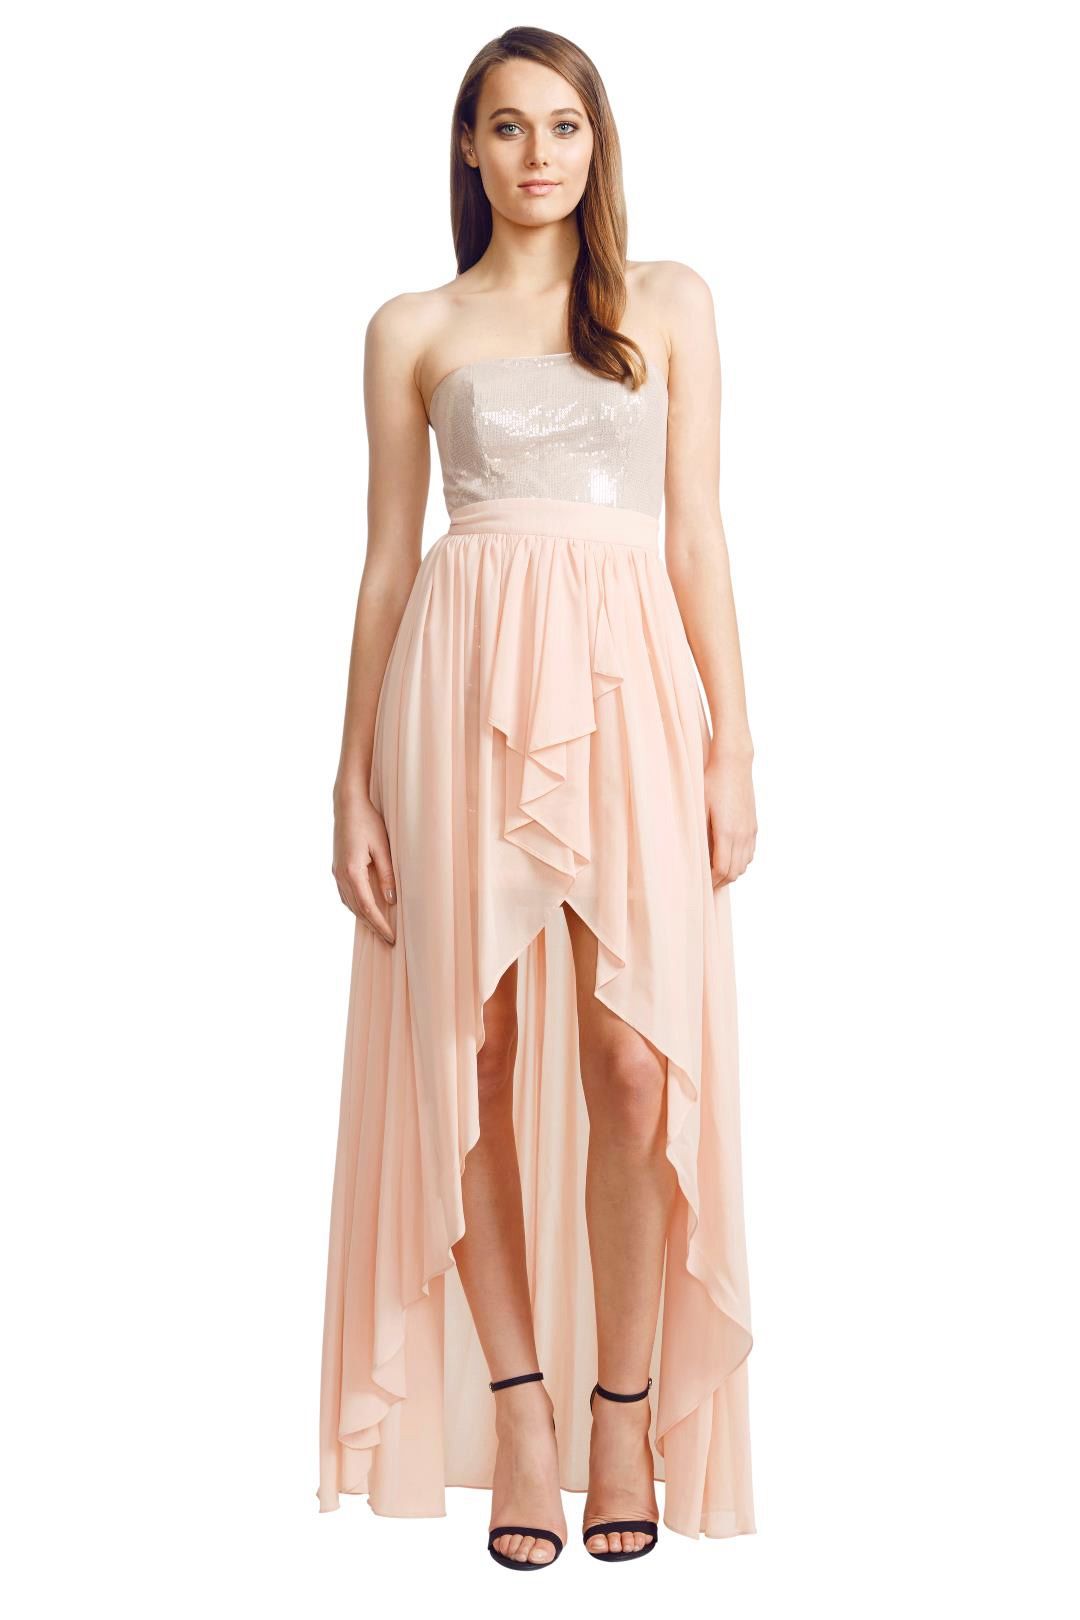 Grace and Hart - Athena Dress - Pink - Front